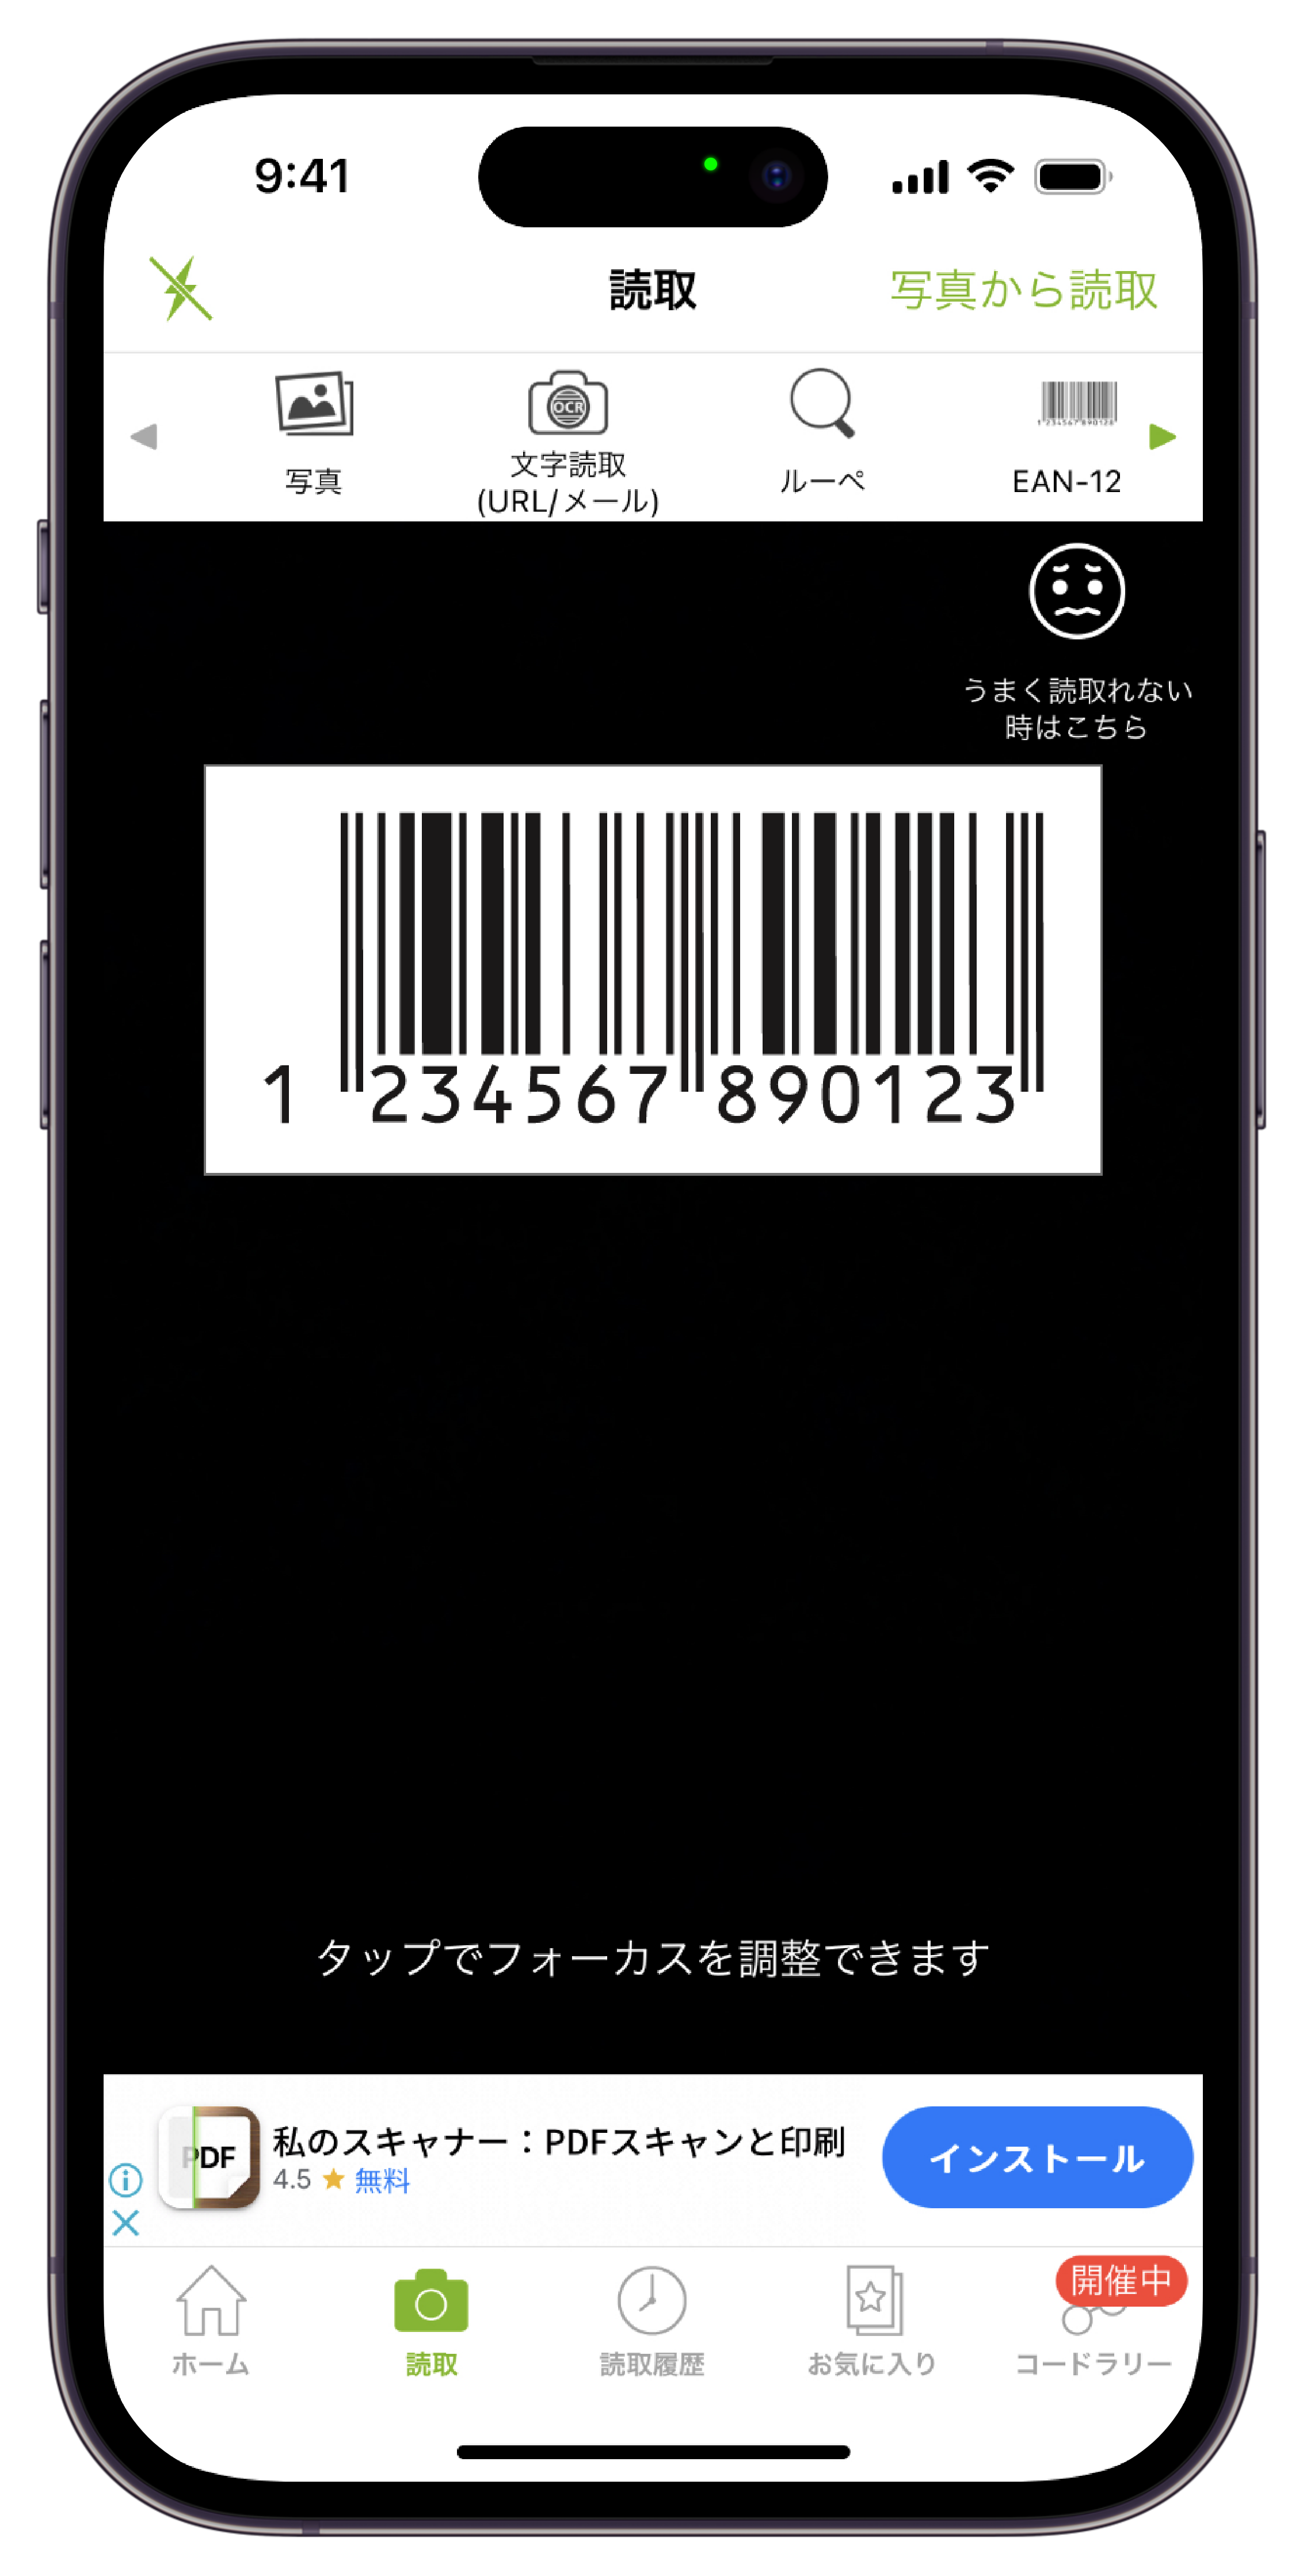 Read barcode